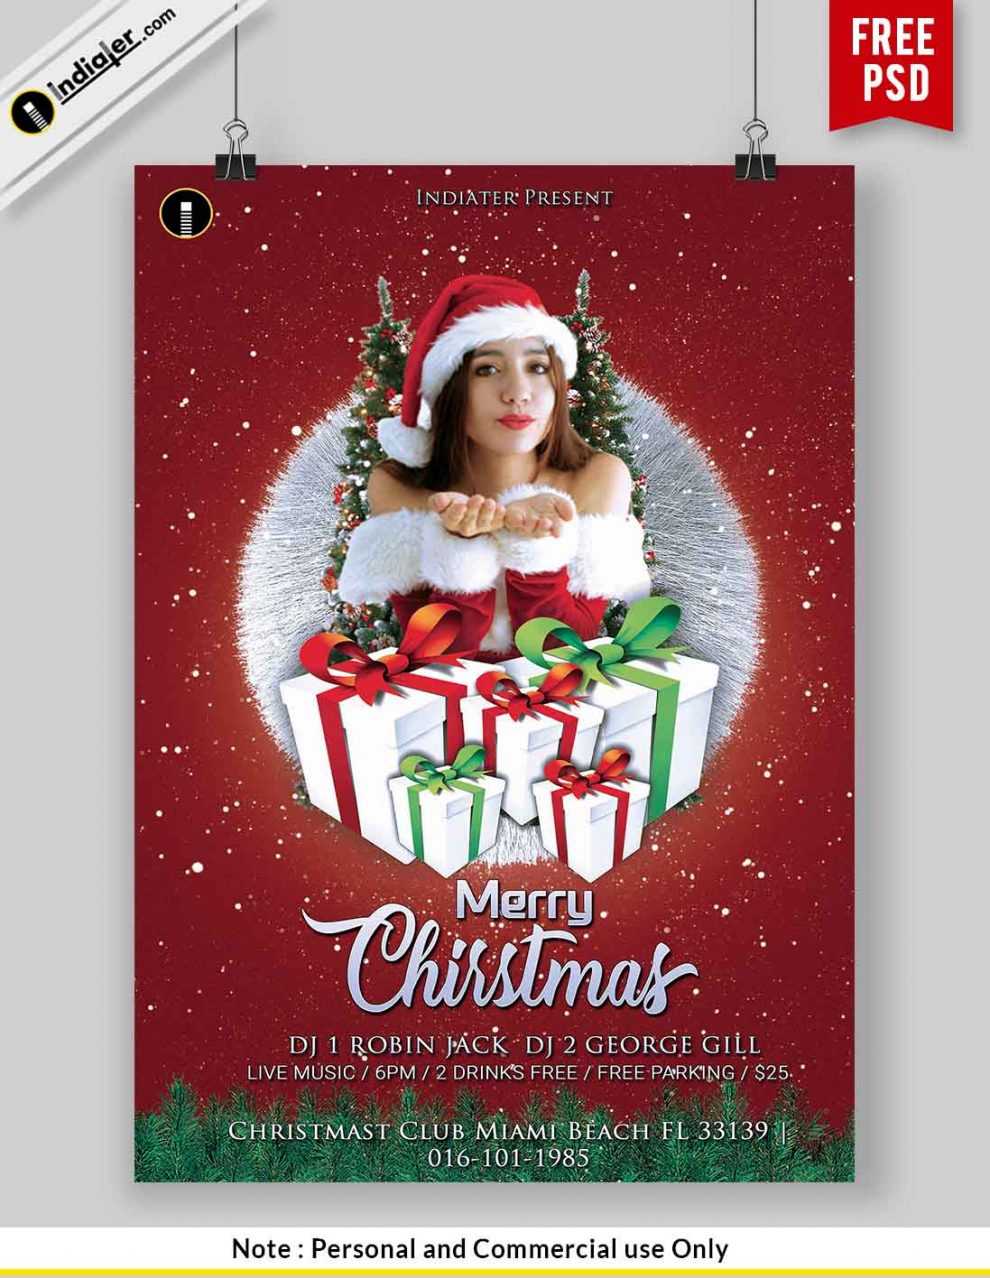 Download Free Christmas Flyer Psd Templates For Print – Indiater Inside Christmas Brochure Templates Free